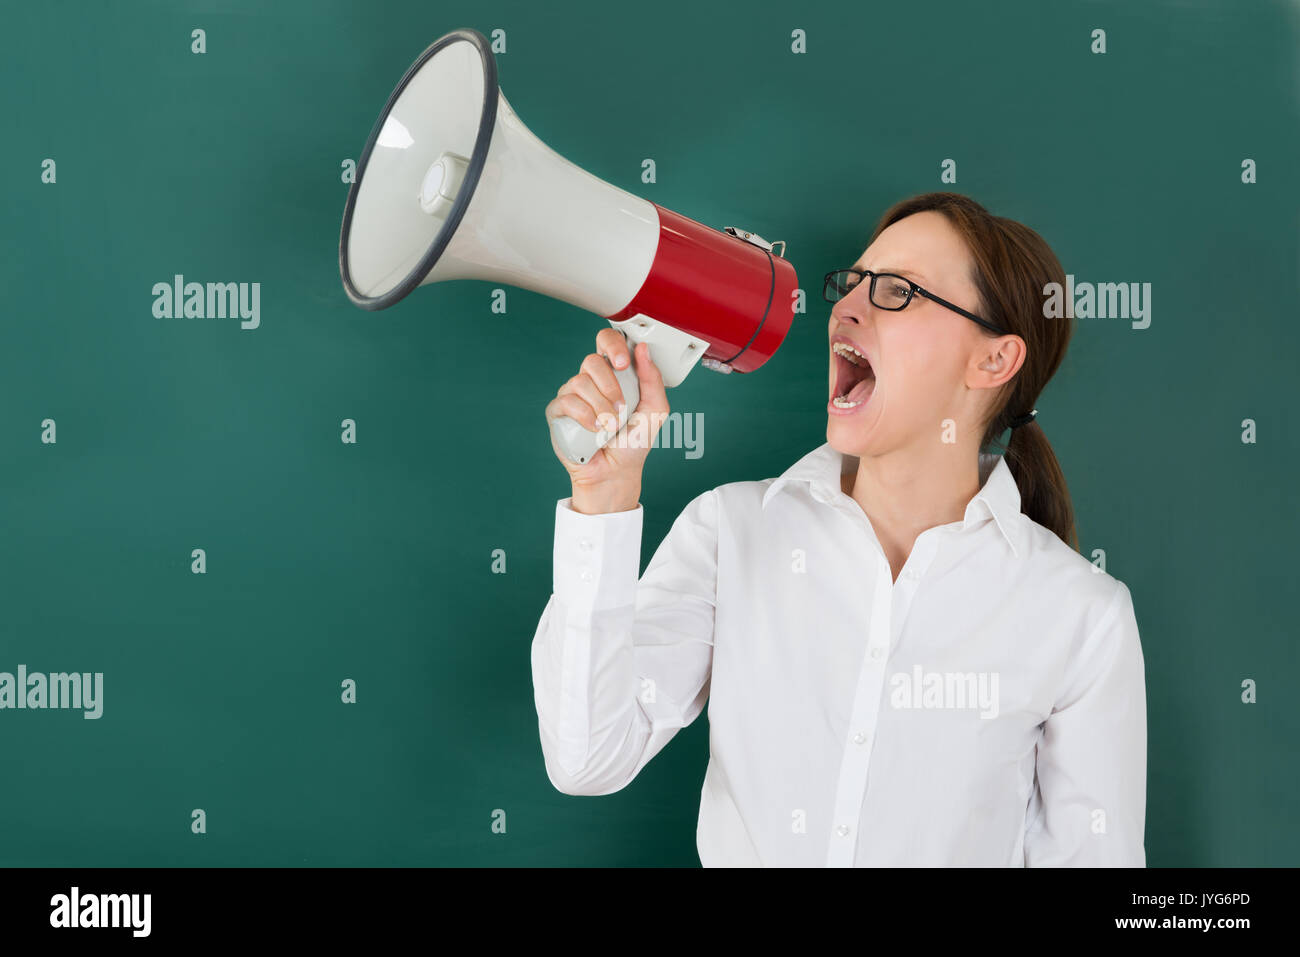 Young Businesswoman Shouting Though Megaphone Against Chalkboard Stock Photo